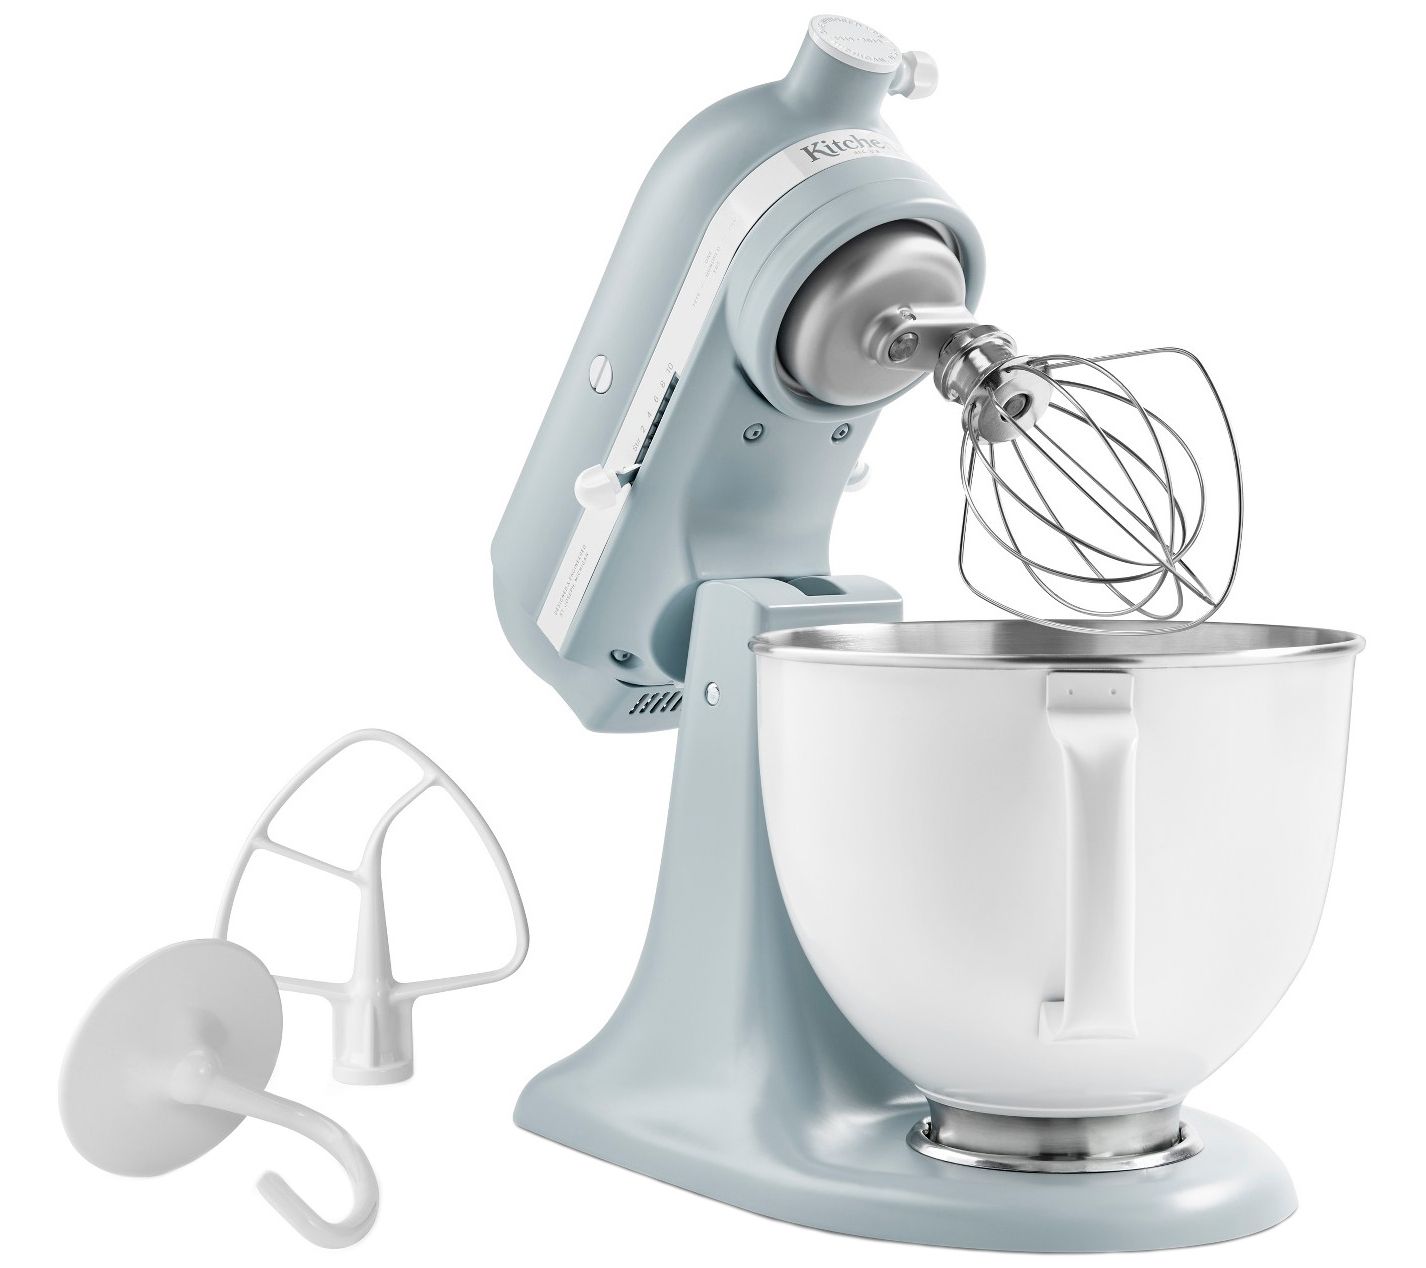 KitchenAid Stand Mixer Painted White 5-Qt. Stainless Steel Mixing